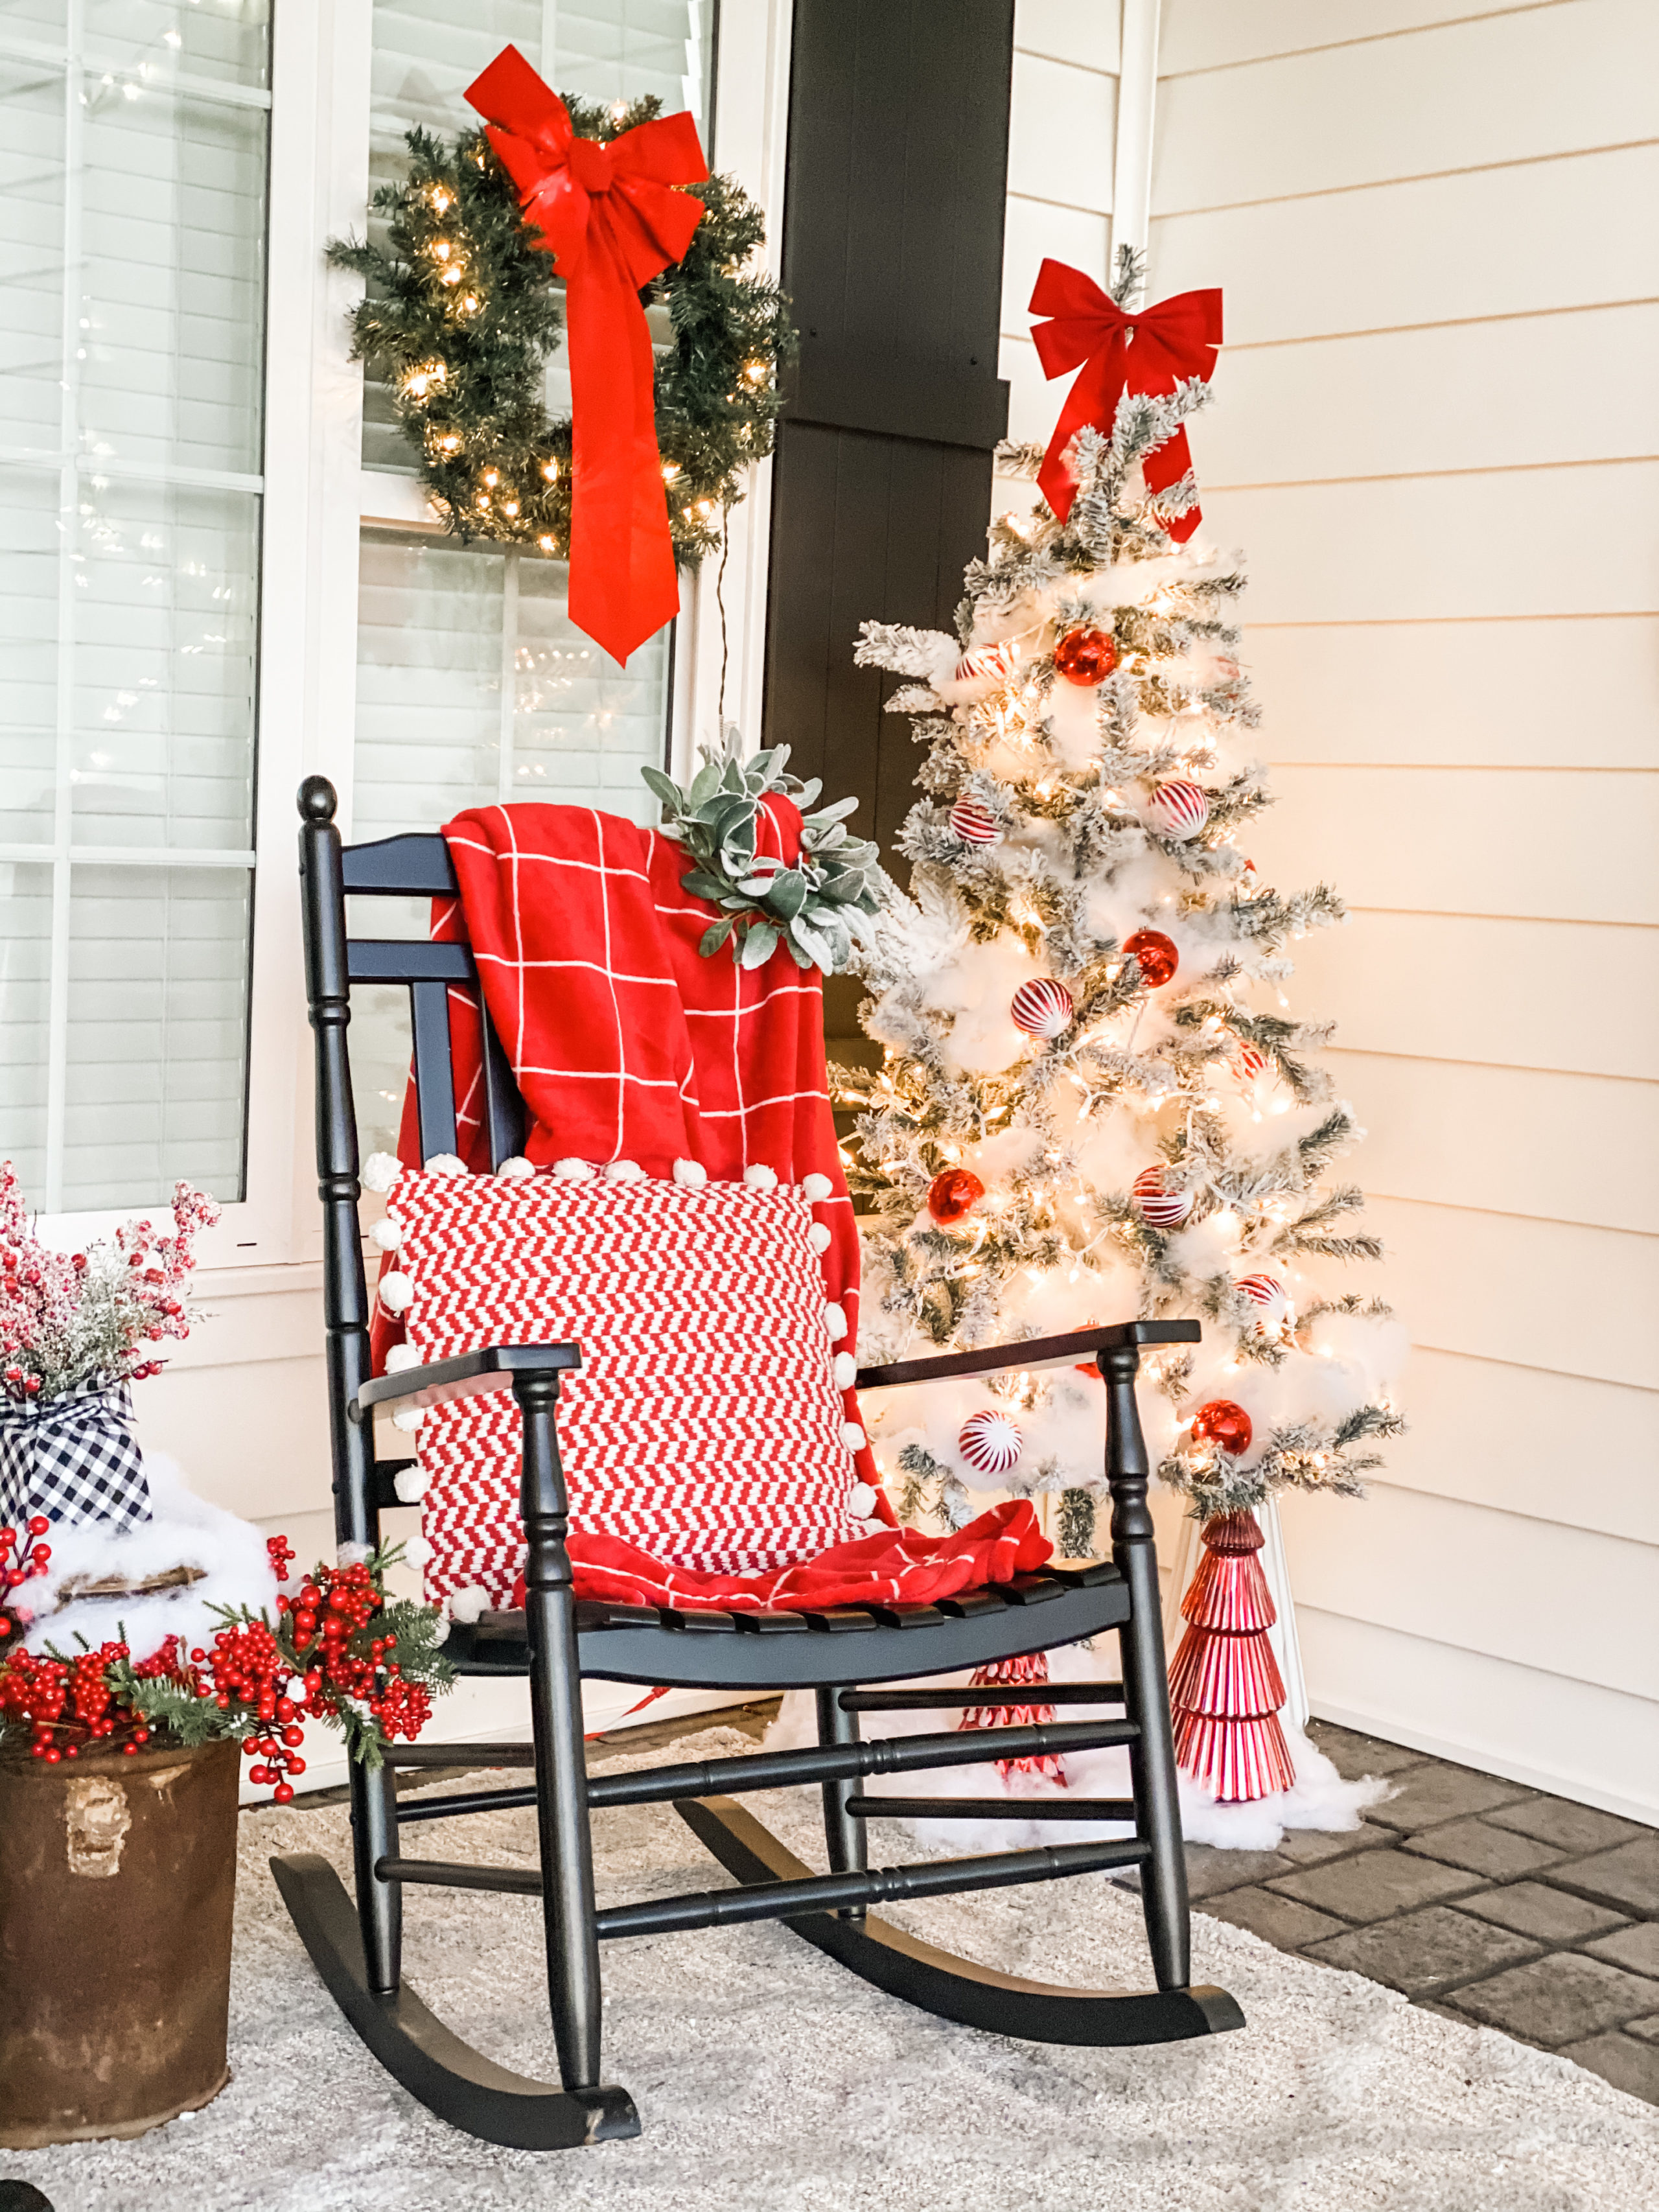 how to decorate a red and white christmas tree - Re-Fabbed